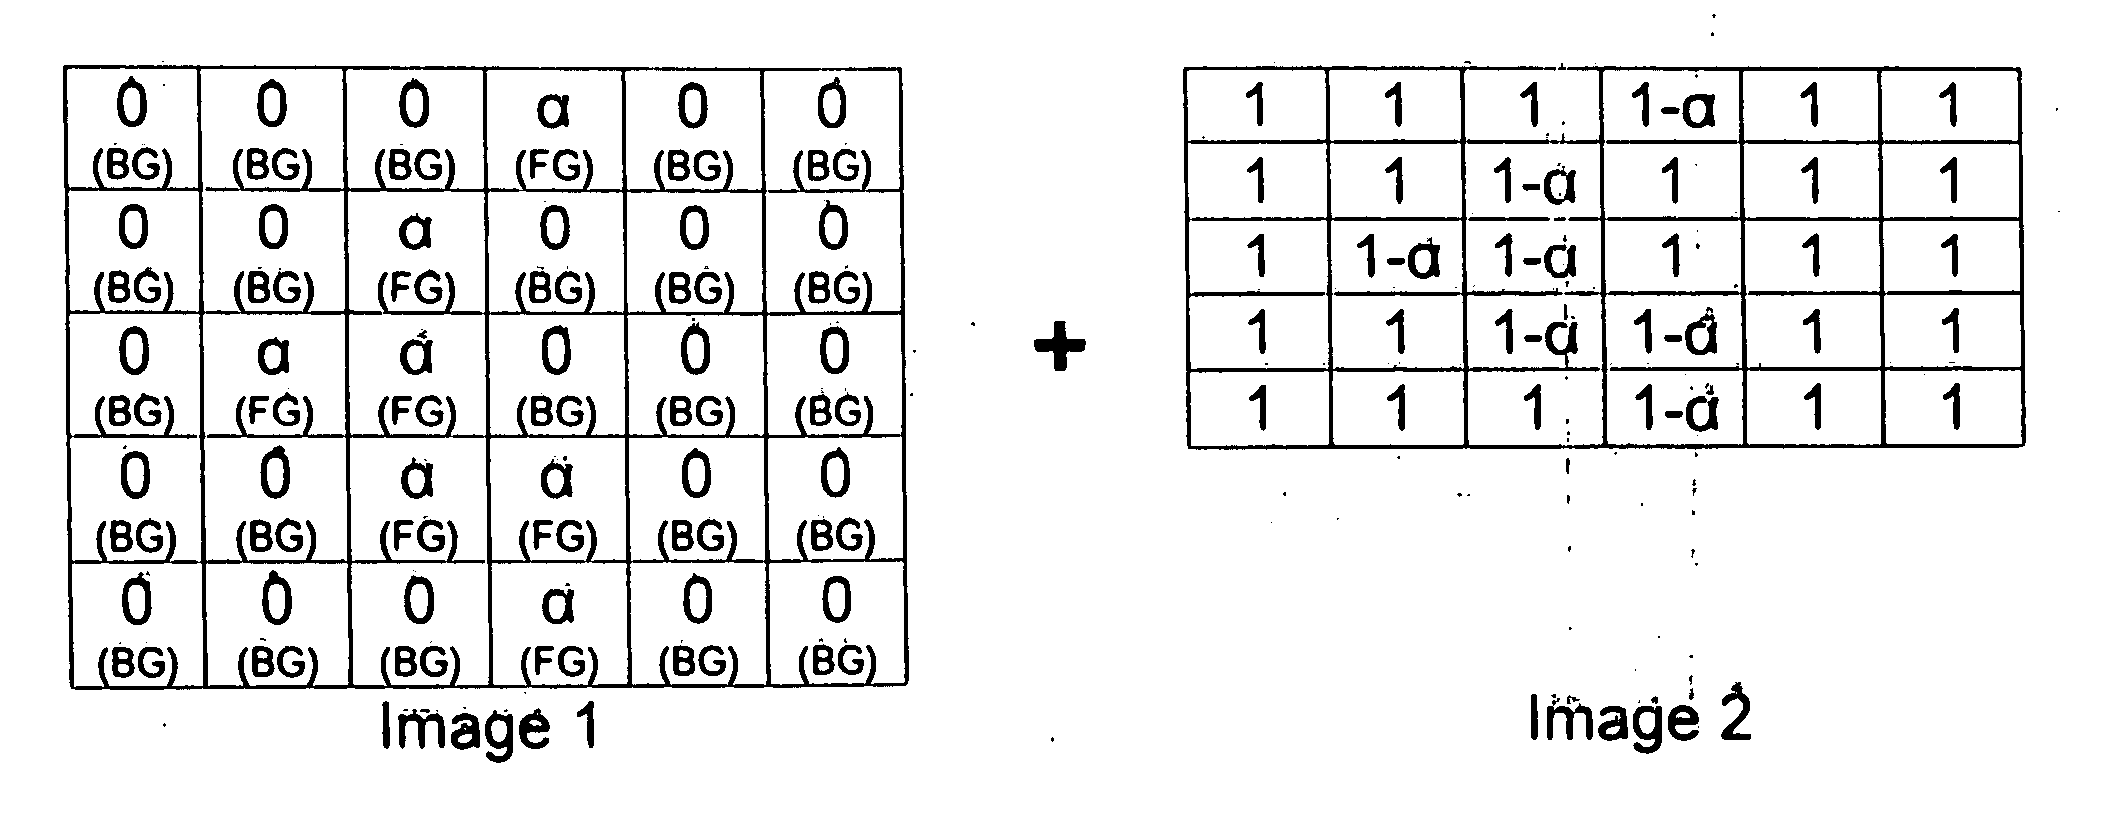 Method for combining two images based on eliminating background pixels from one of the images